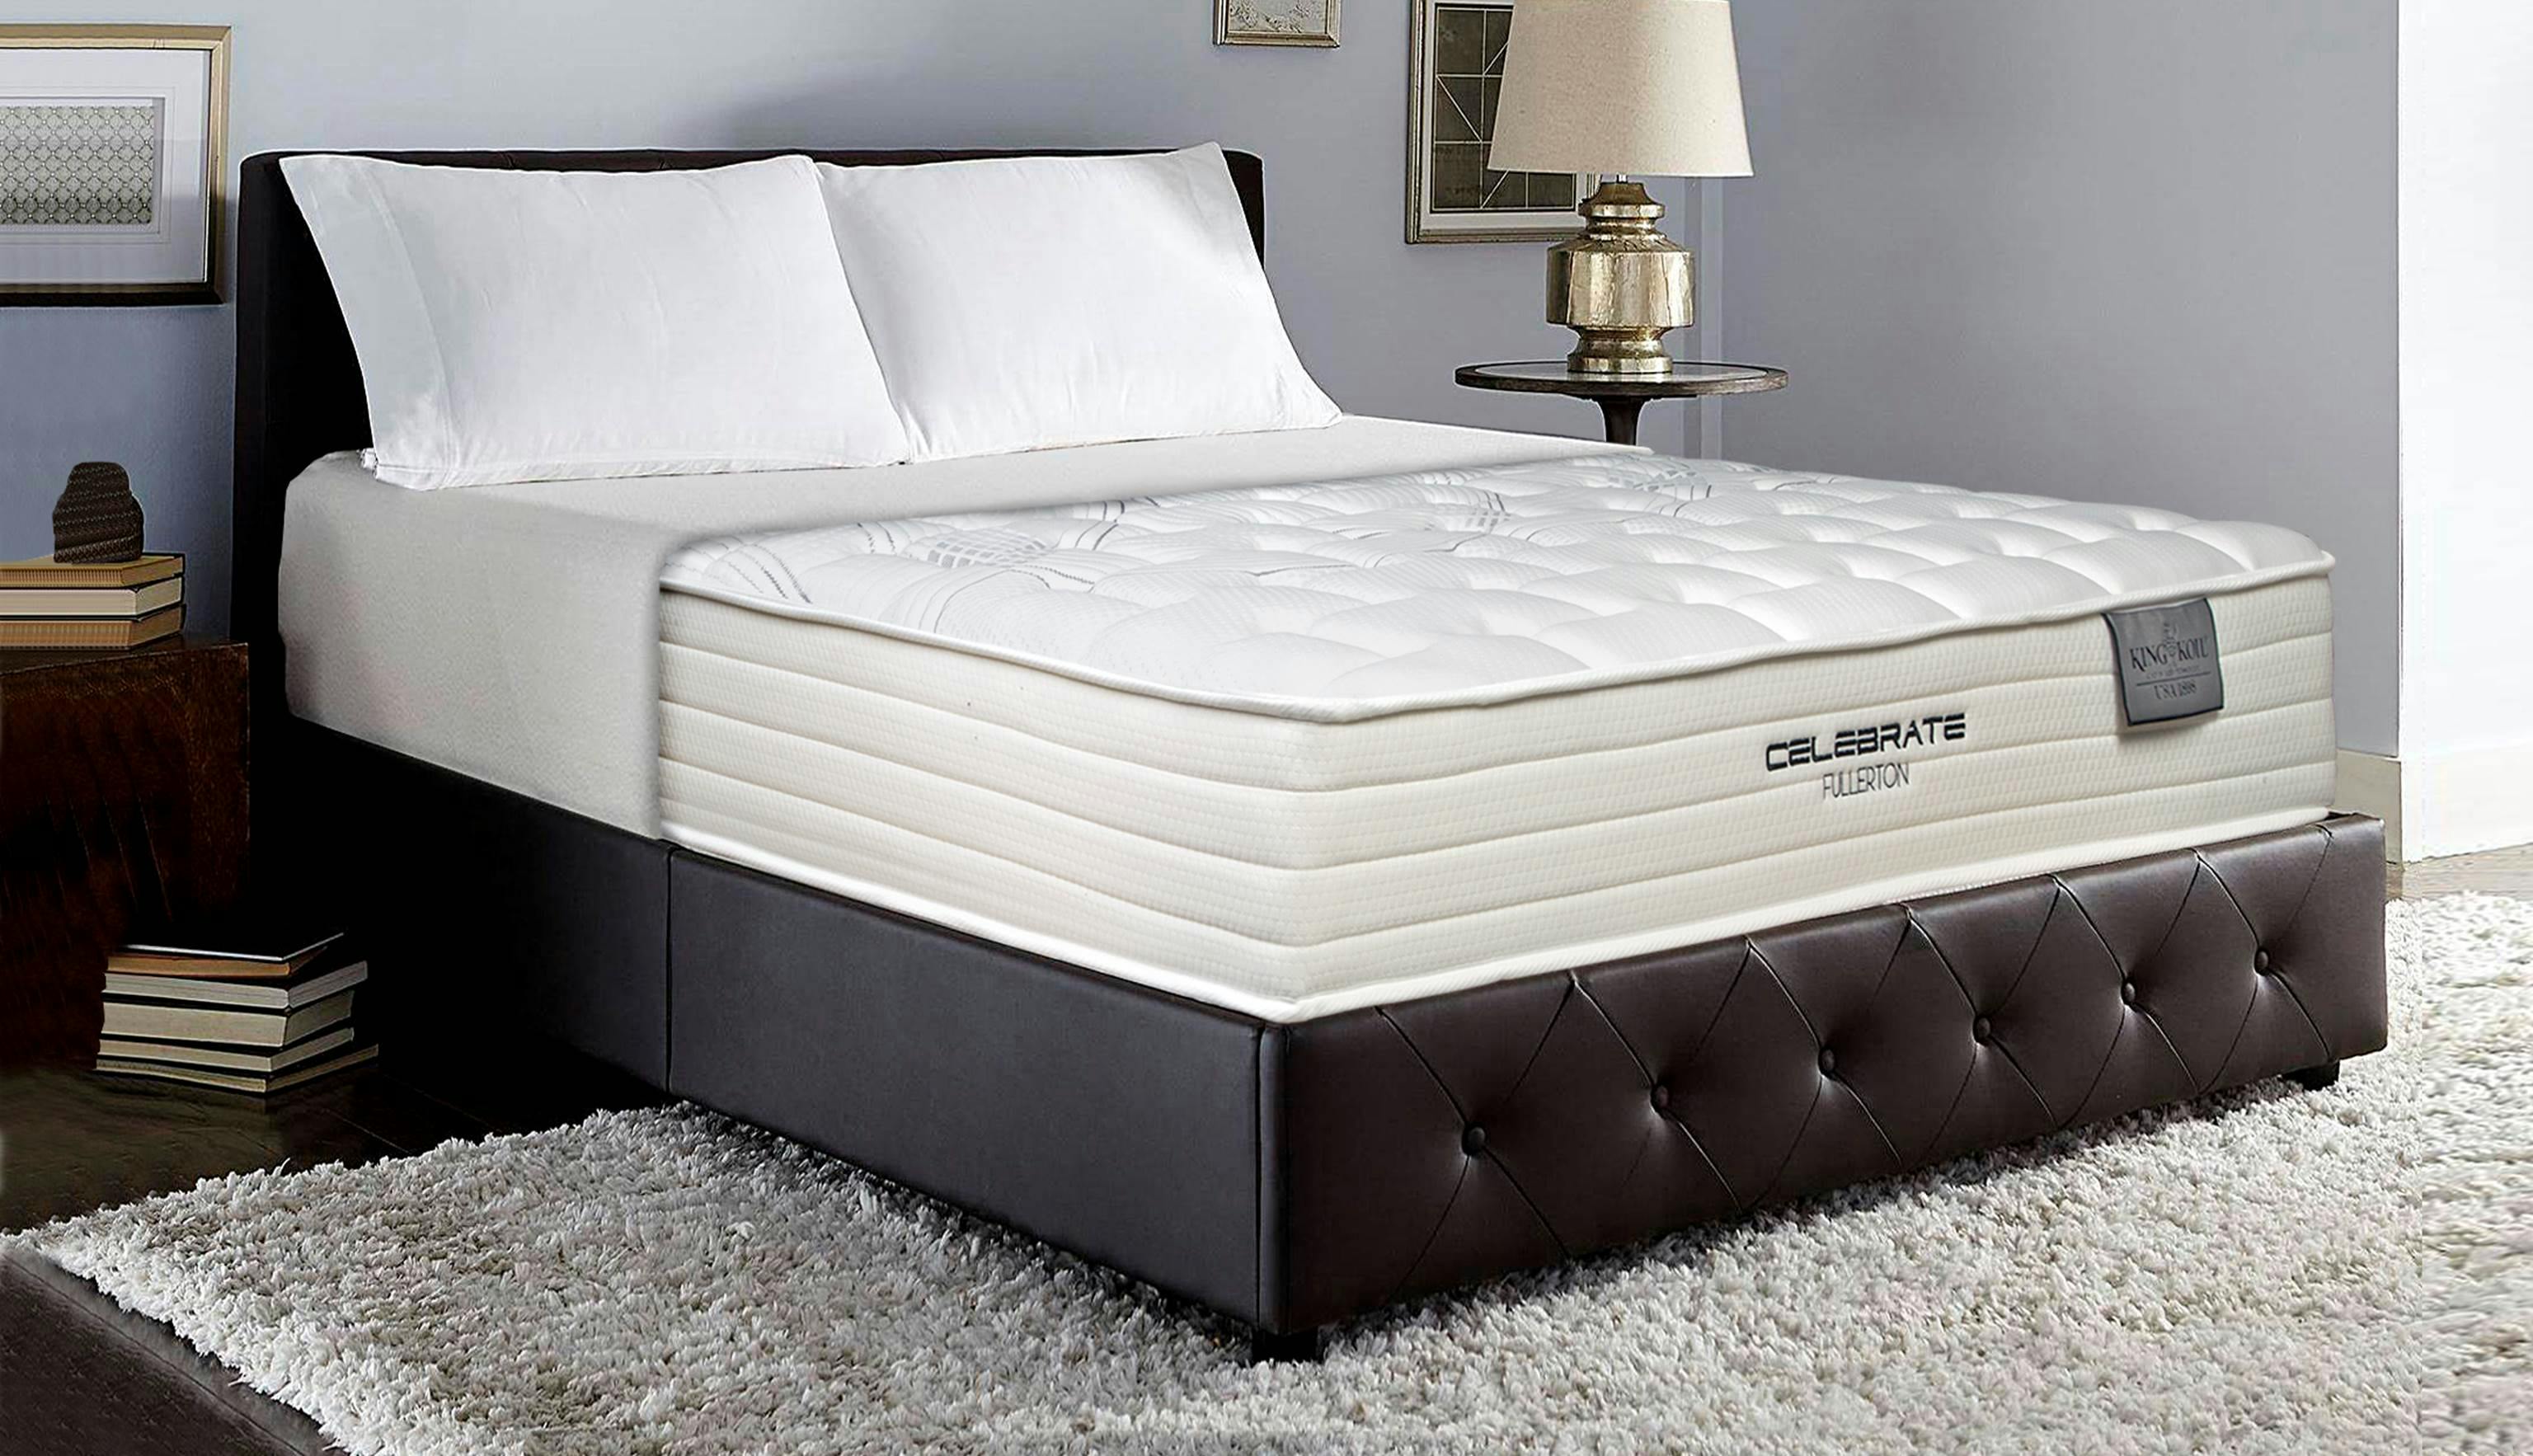 Best Of 63+ Striking king bed queen size mattress Satisfy Your Imagination